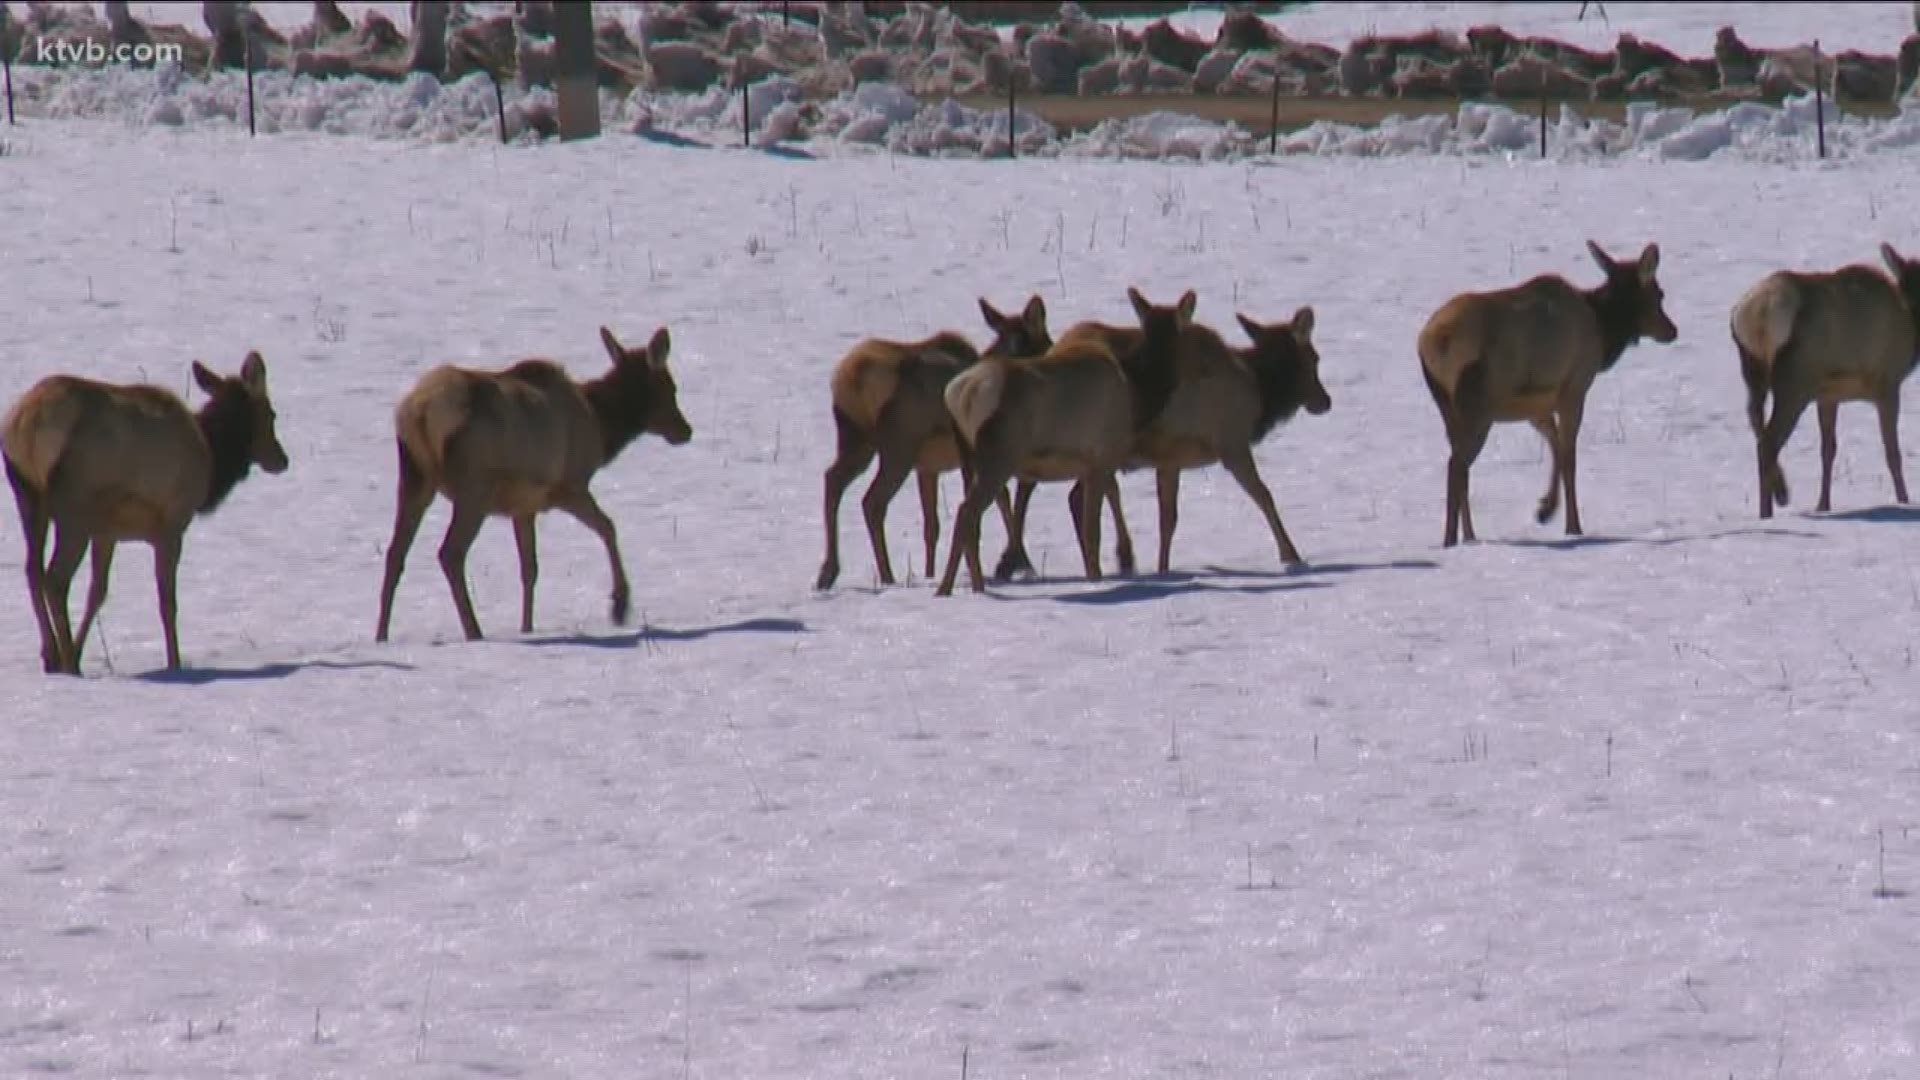 Idaho Fish and Game said 206 elk were killed and it was part of a research project to prevent elk from damaging private property and crops.